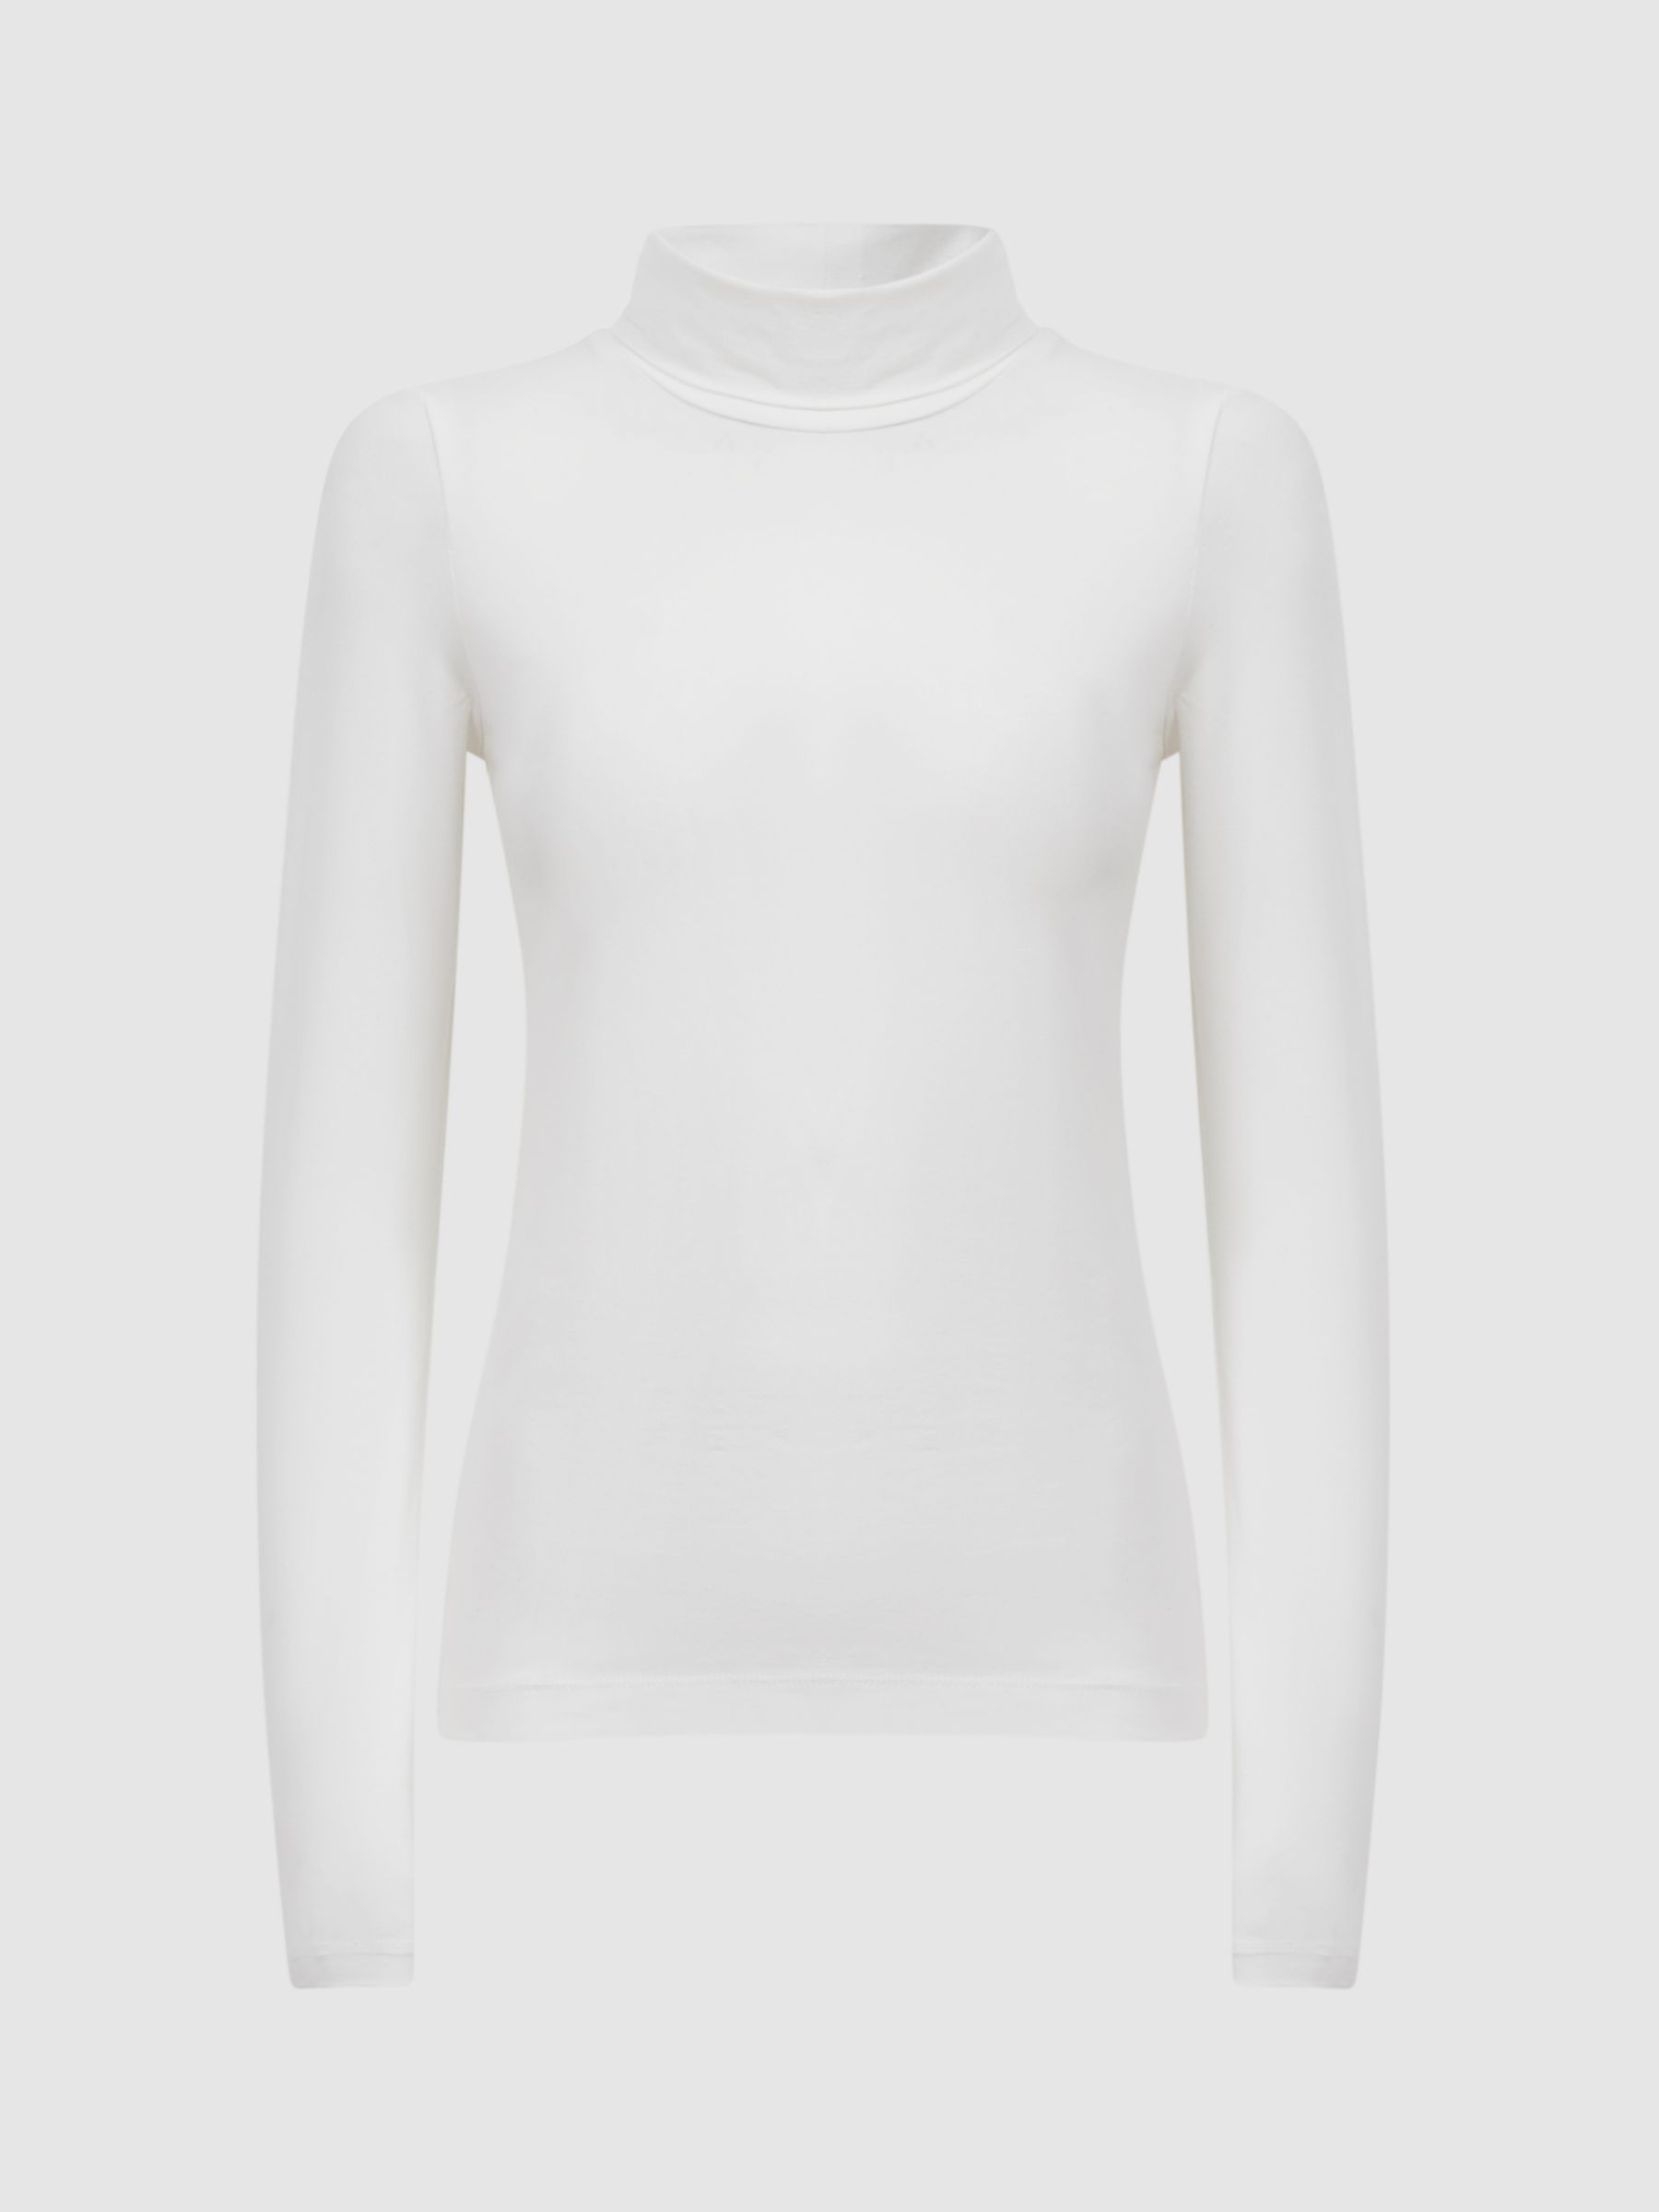 Reiss Piper Fitted Roll Neck Top, White at John Lewis & Partners